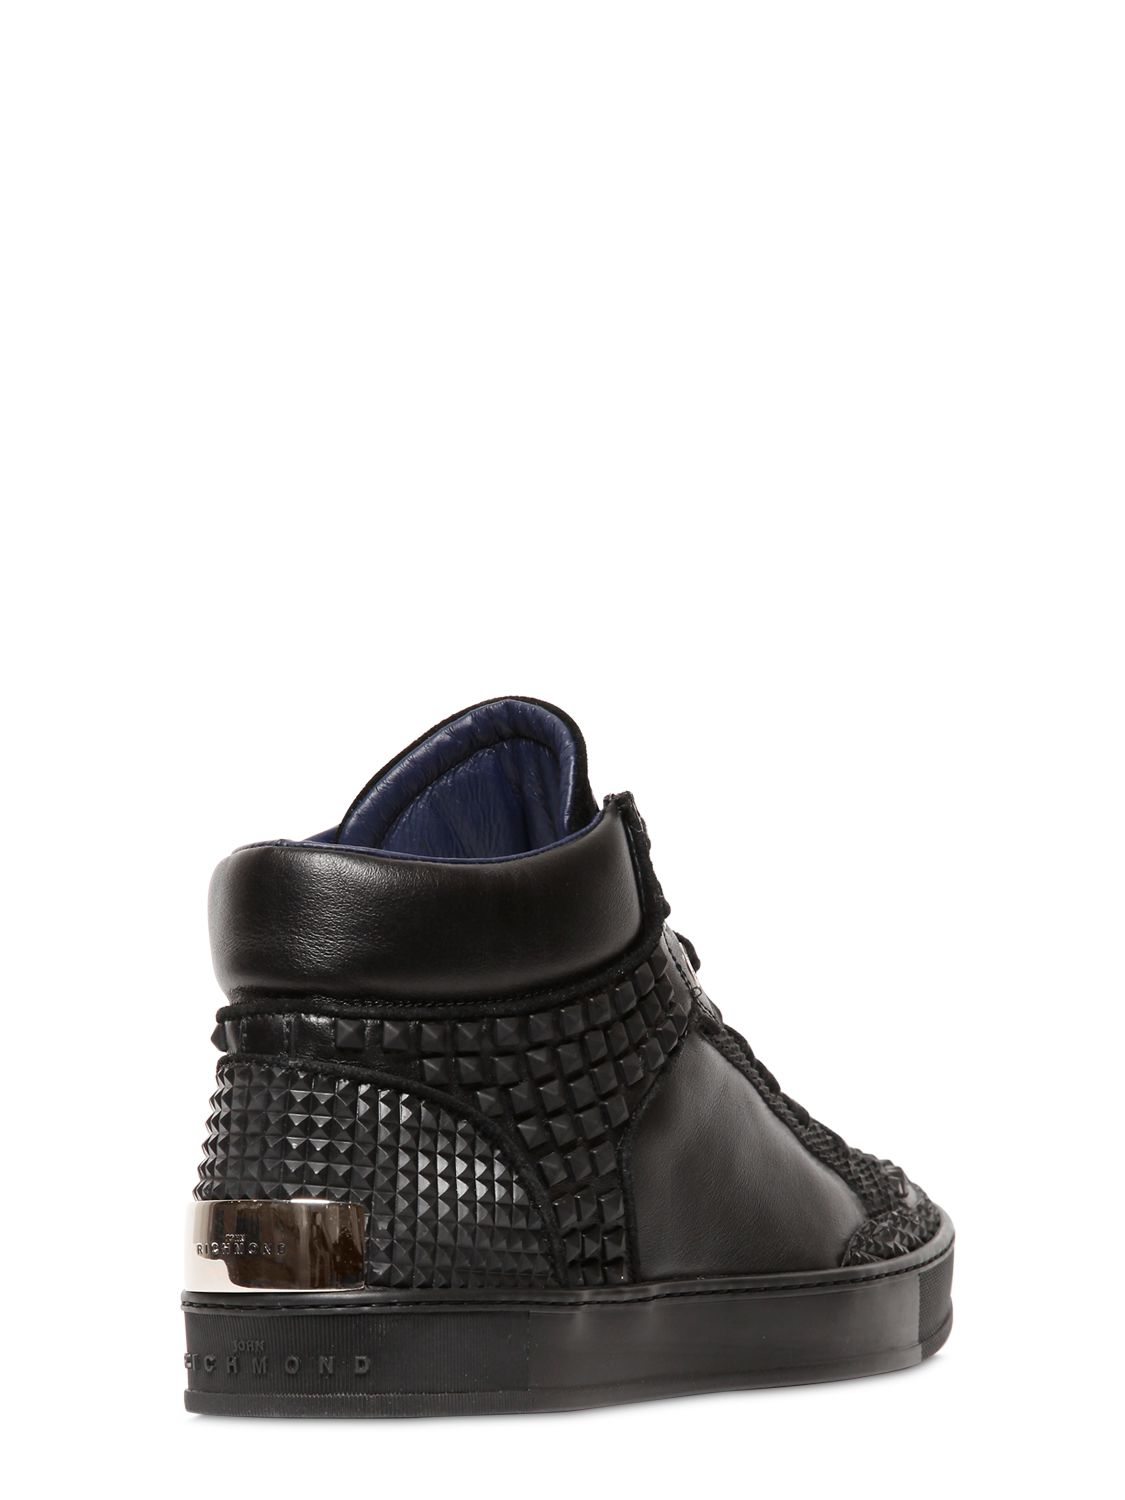 John Richmond Studded Leather High Top Sneakers in Black | Lyst